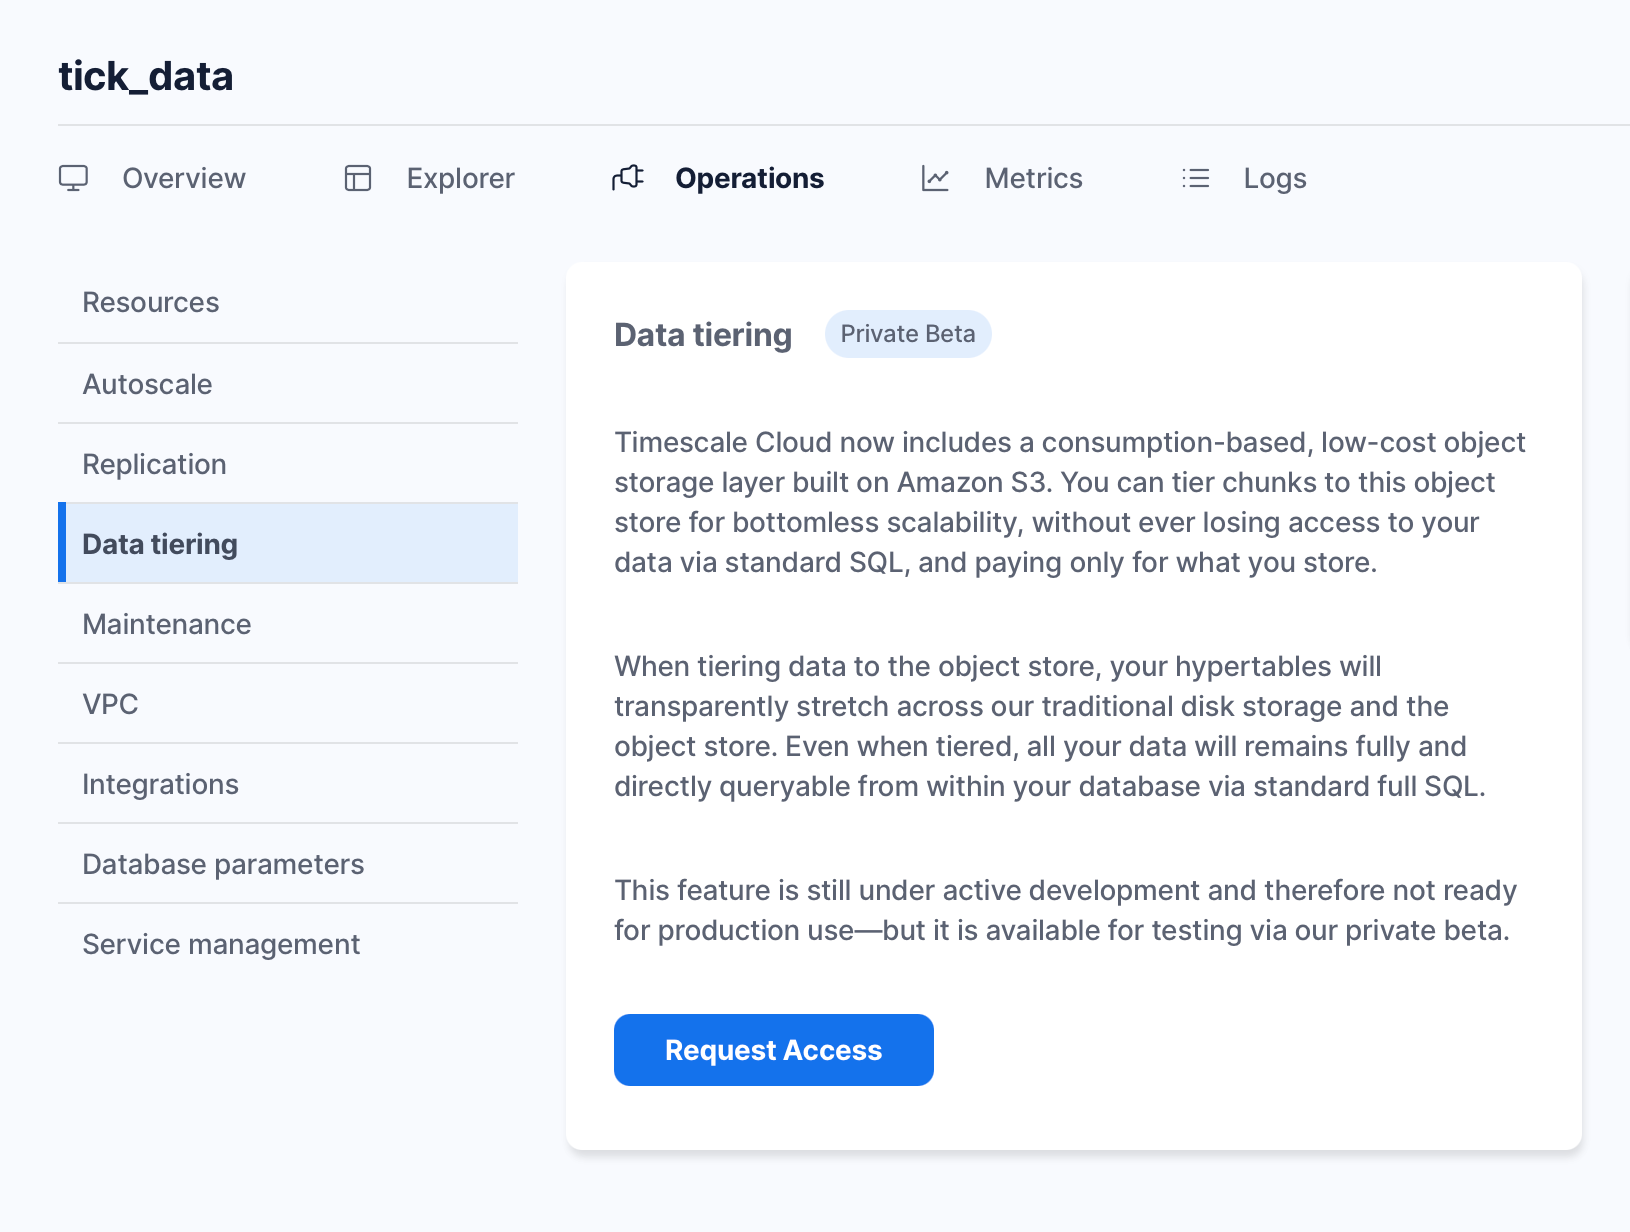 You can request access to our private beta via the Timescale Cloud UI.